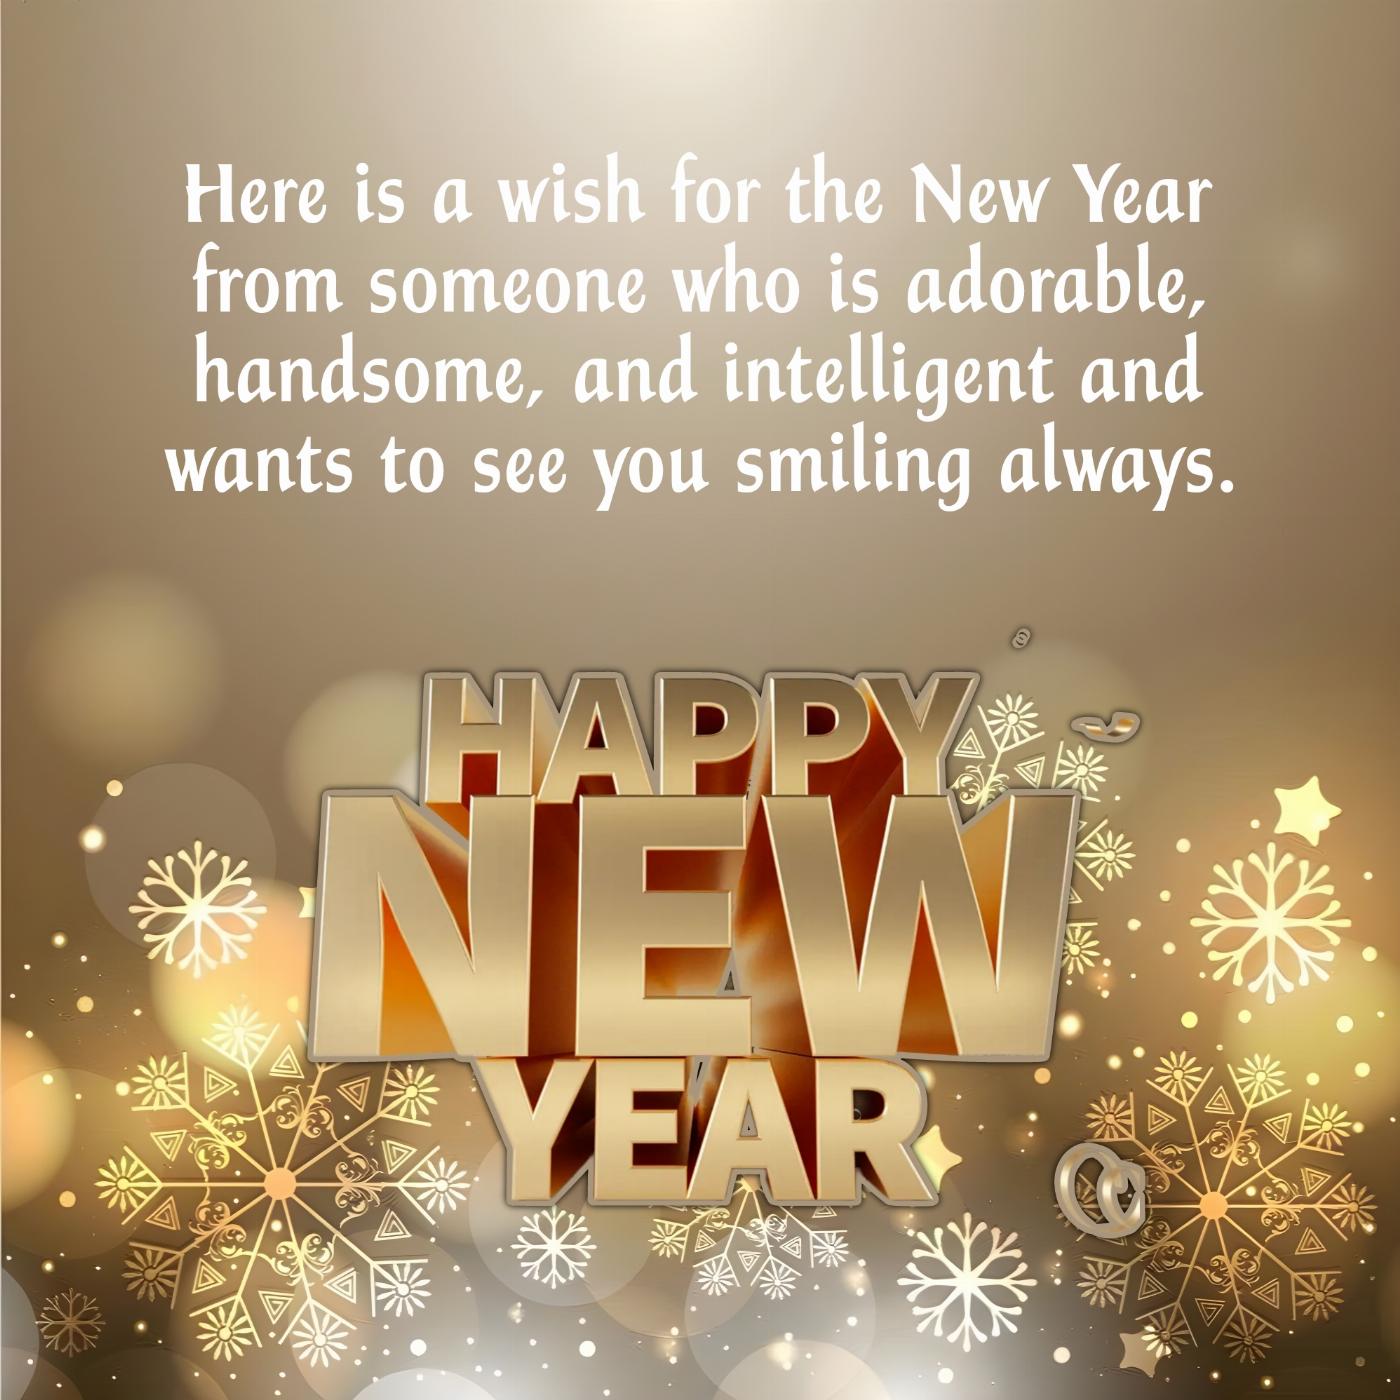 Here is a wish for the New Year from someone